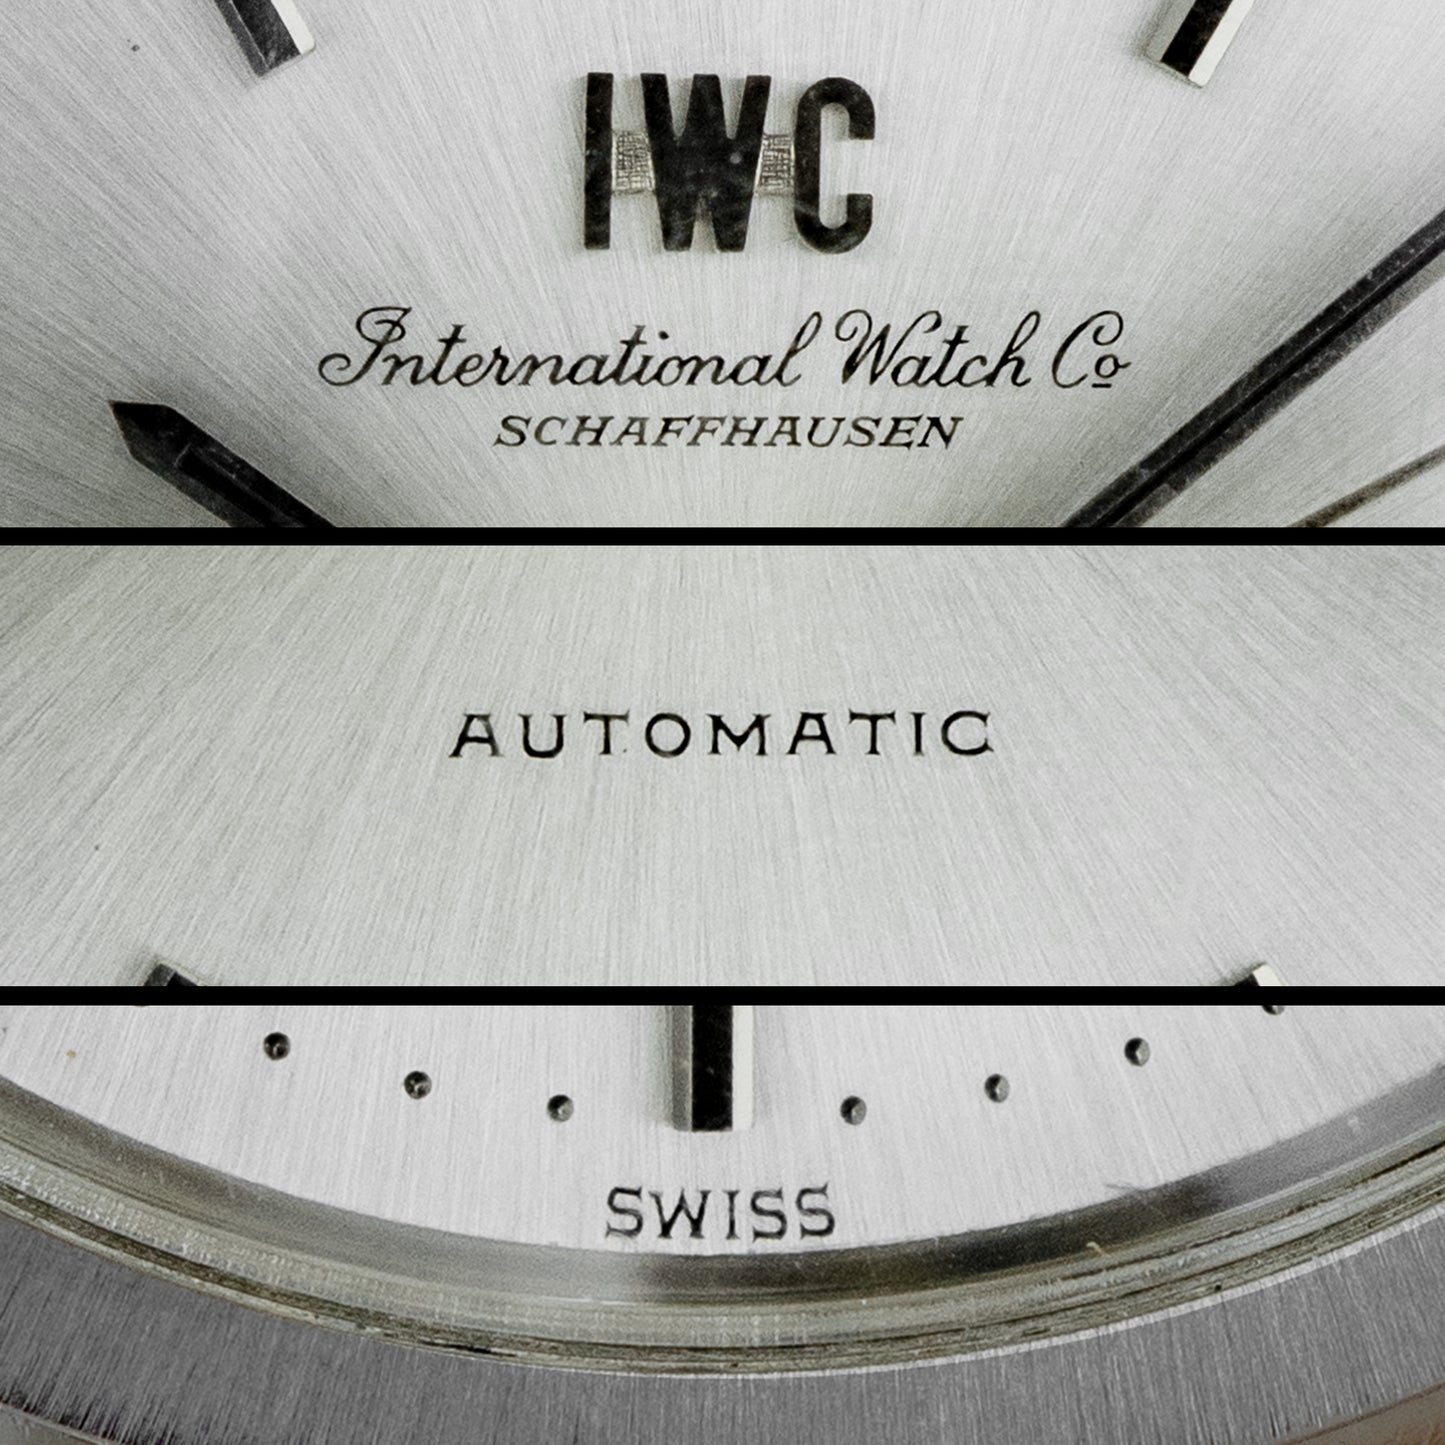 No. 186 / IWC Automatic with Paper - 1960s